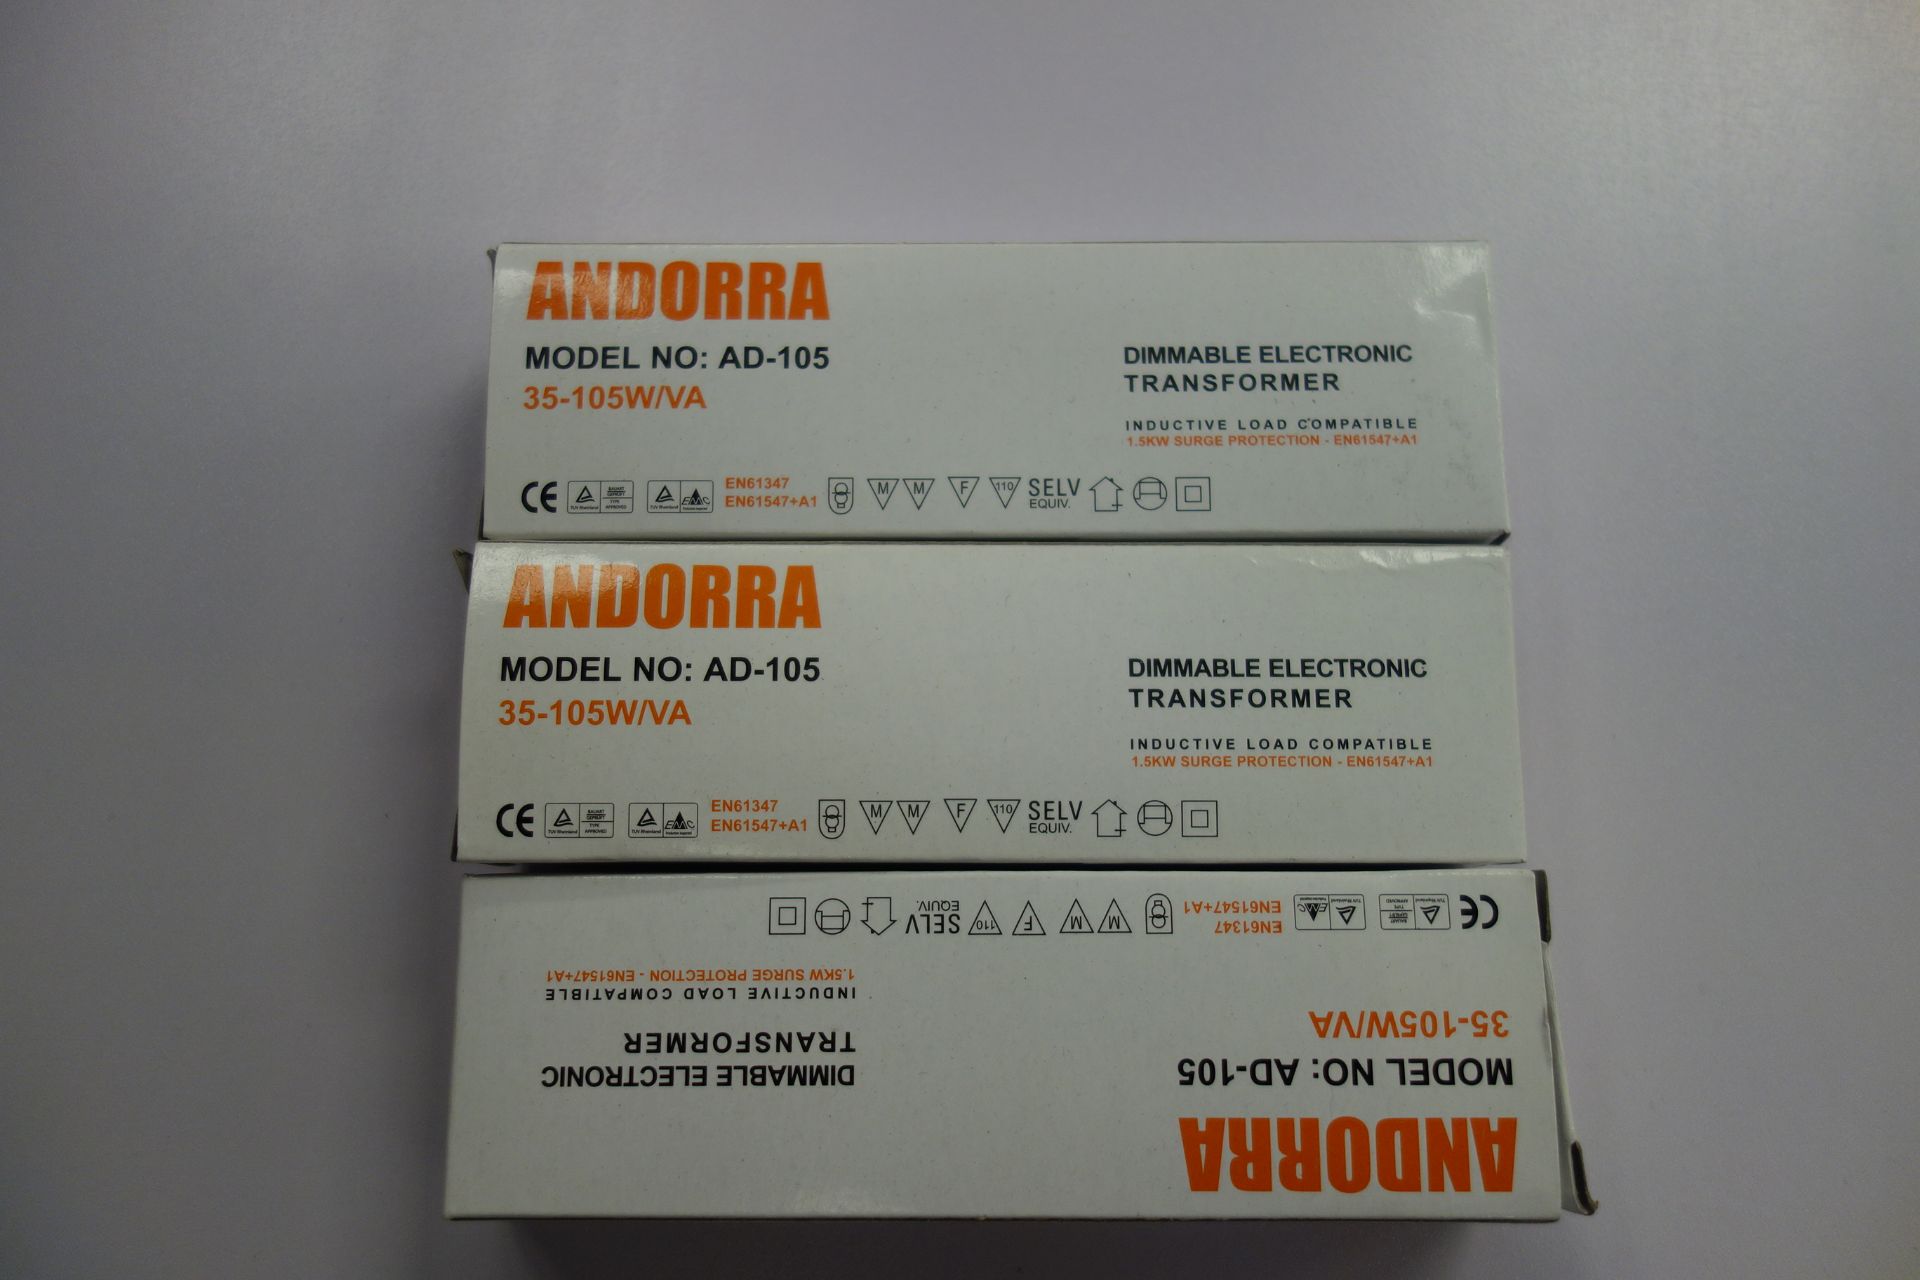 46 X Andorra AD 105 35-105W/VA Dimmable Electronic Transformer Inductive Load Compatible 1.5KW Surge